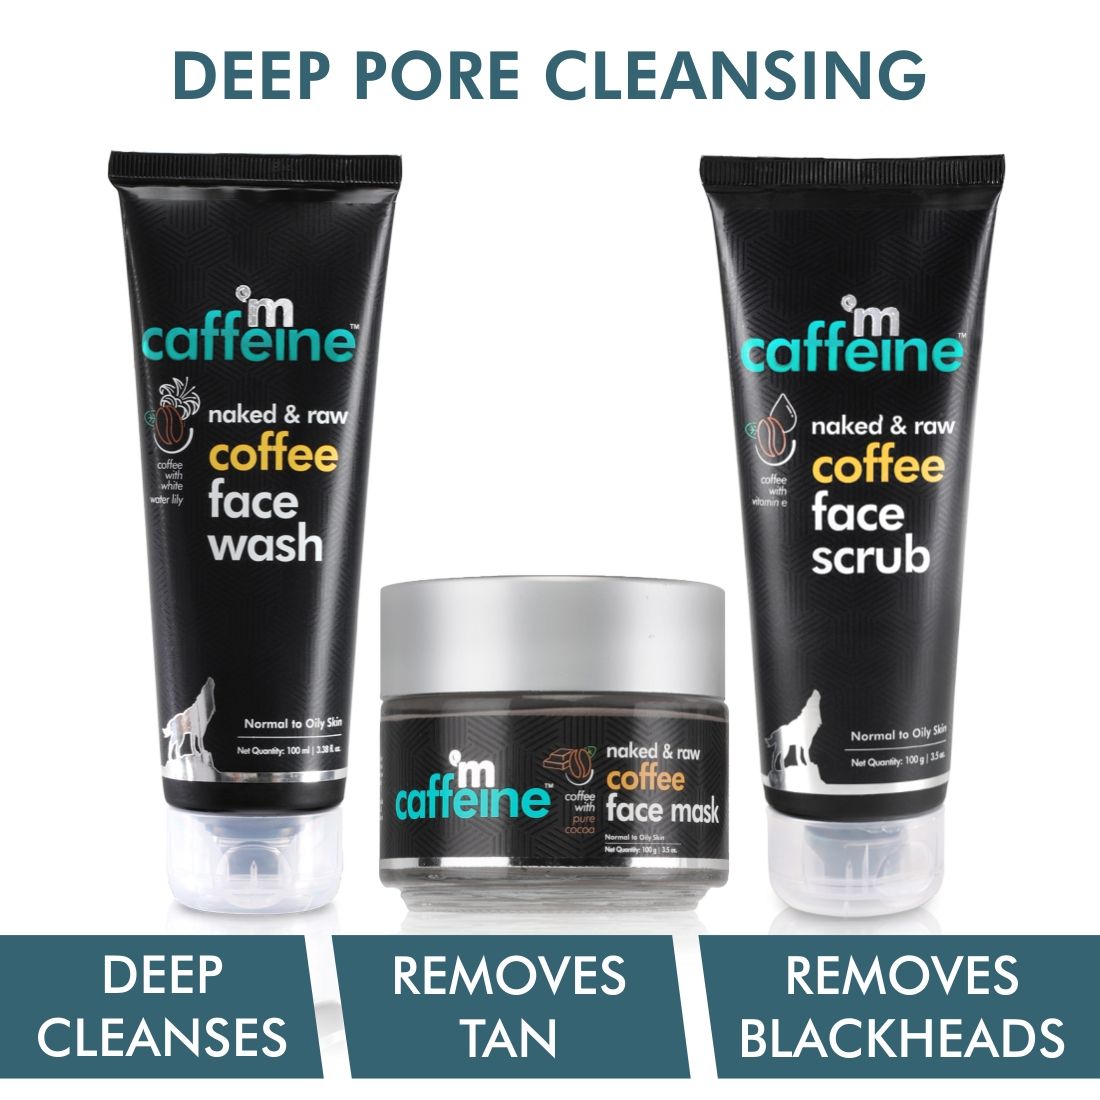 Buy mCaffeine Deep Pore Cleansing Regime | Deep Cleanse, Tan Removal, Blackheads Removal | Face Wash, Face Mask, Face Scrub | Oily/Normal Skin | Paraben & SLS Free 300 gm - Purplle